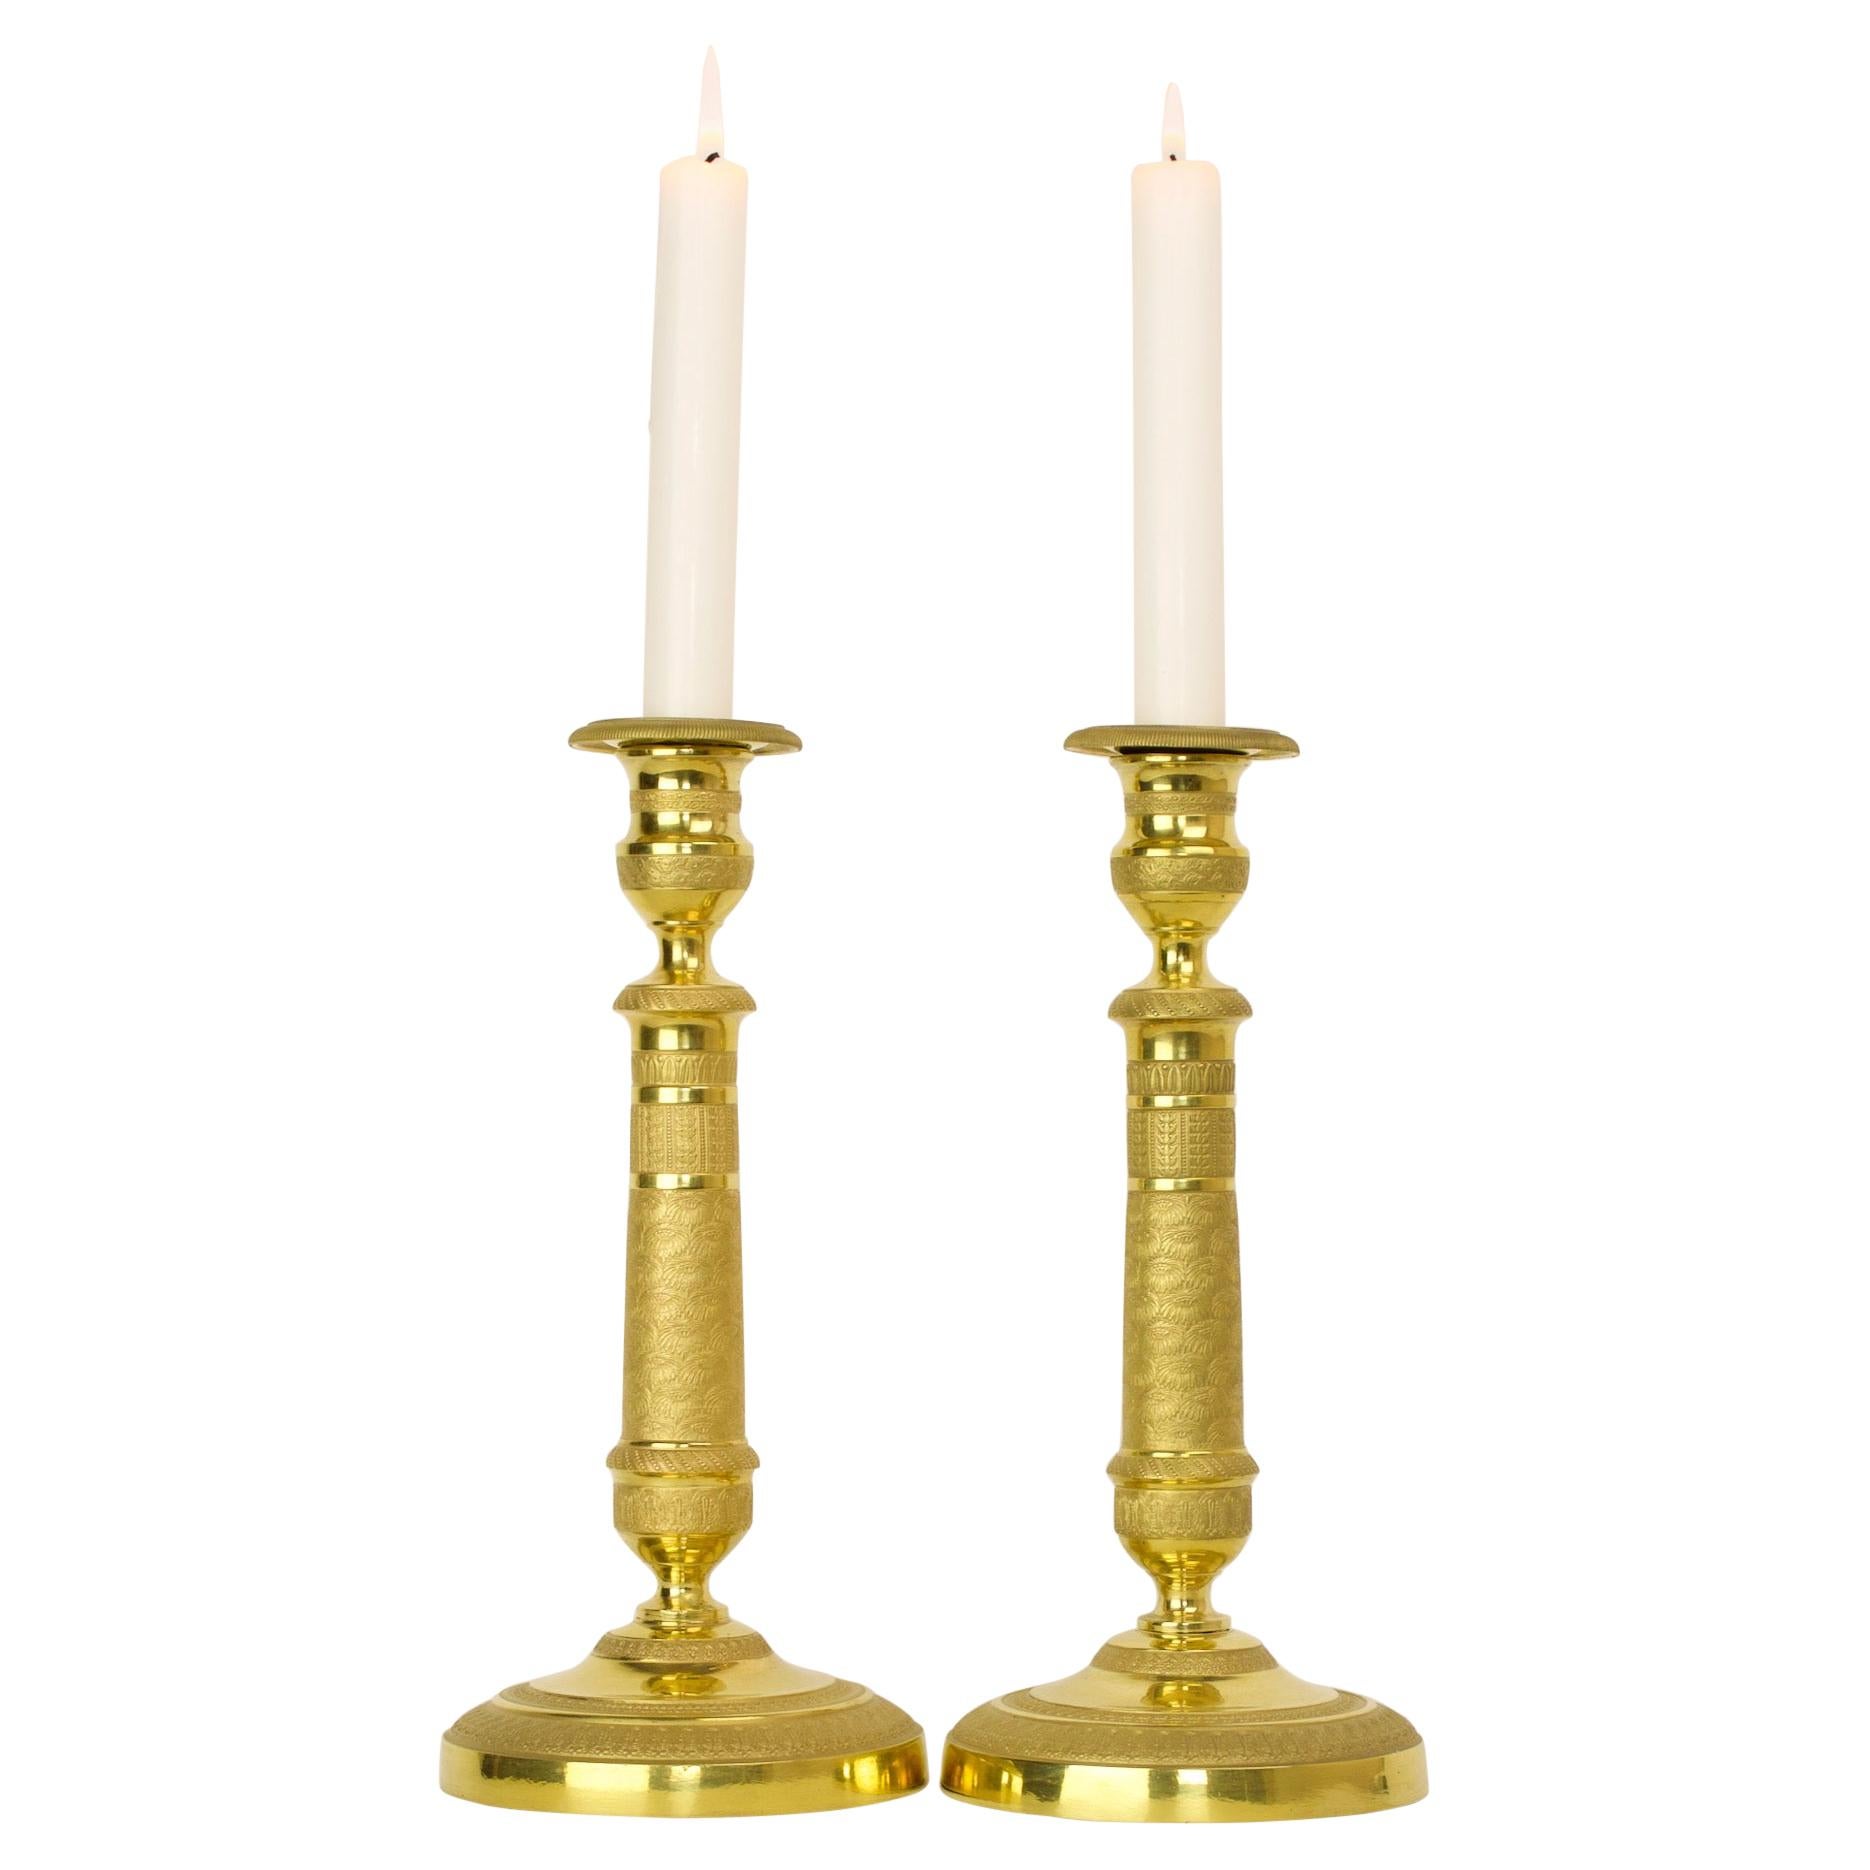 Pair of Early 19 Century French Empire Gilt Bronze Neoclassical Candlesticks